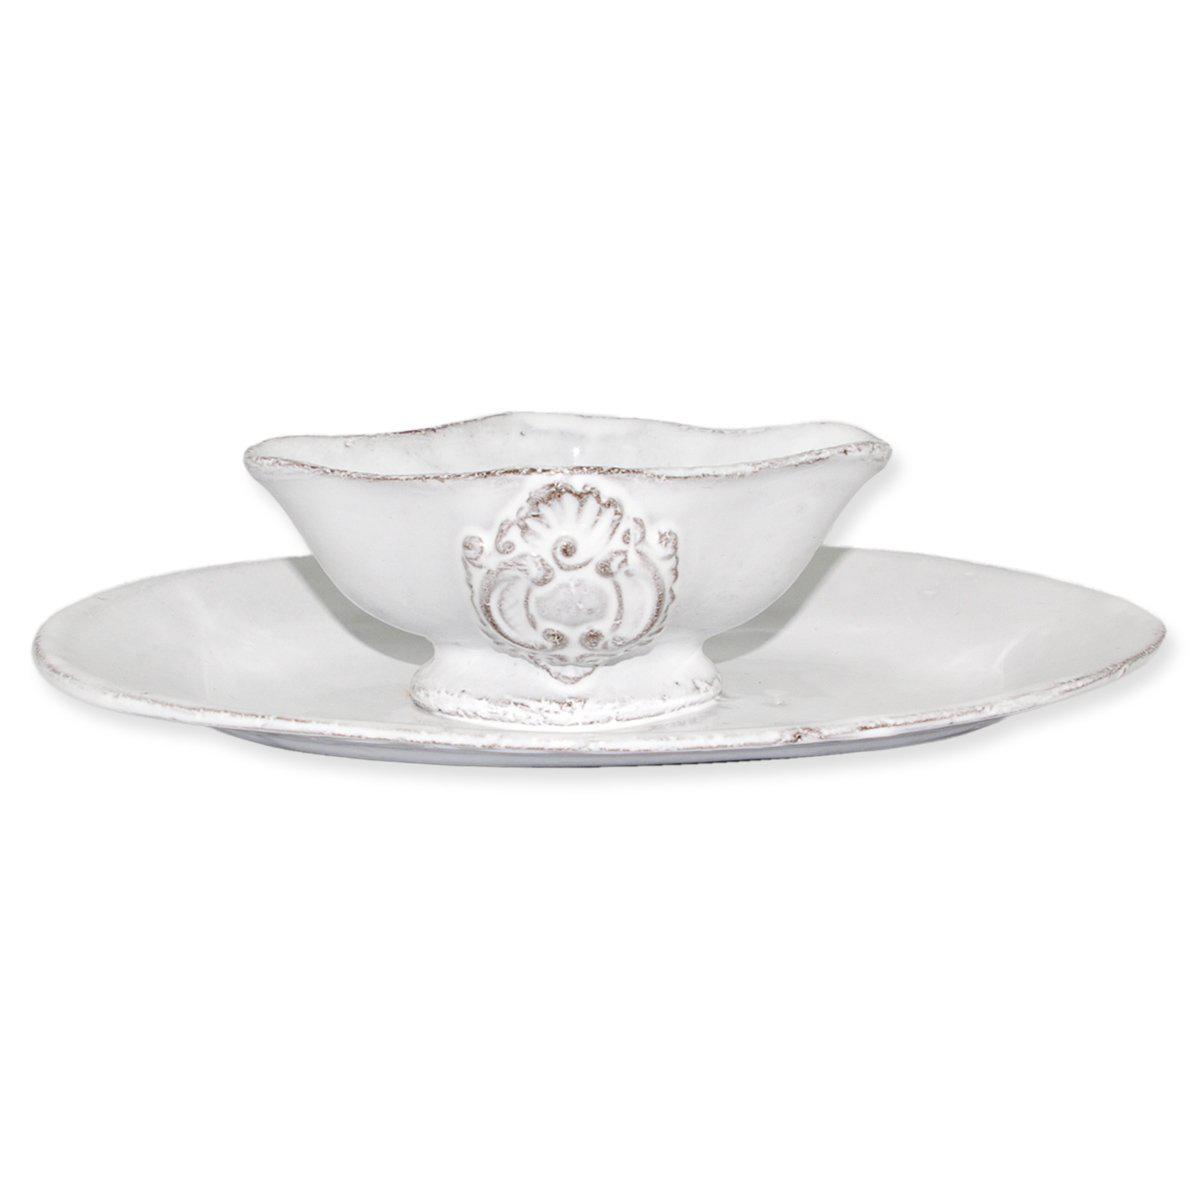 Charles gravy boat with saucer-20x14x5,3cm-Handmade in France by CARRON